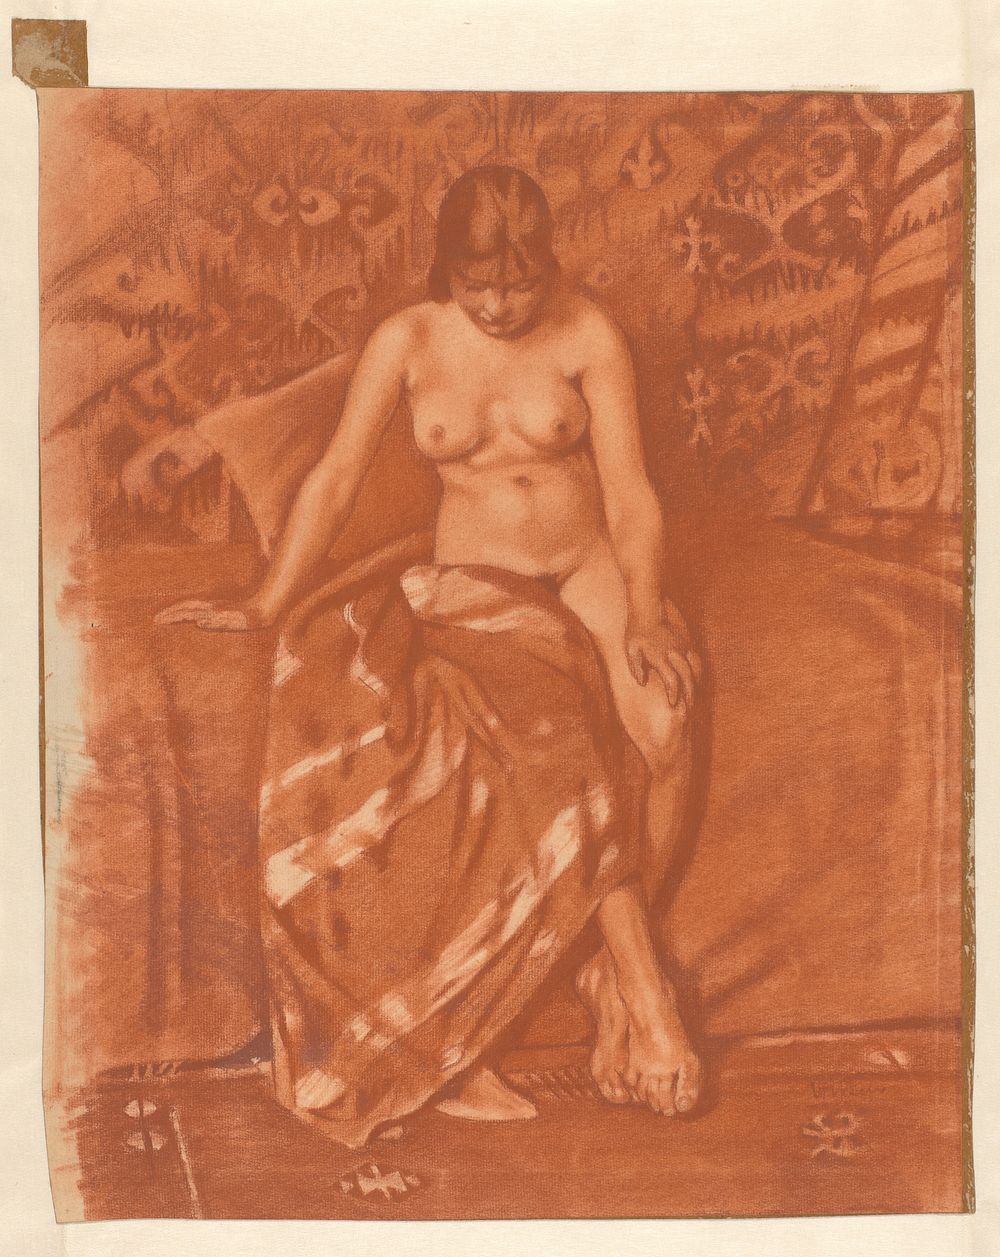 Seated Female Nude (1870 - 1923) by Willem Witsen